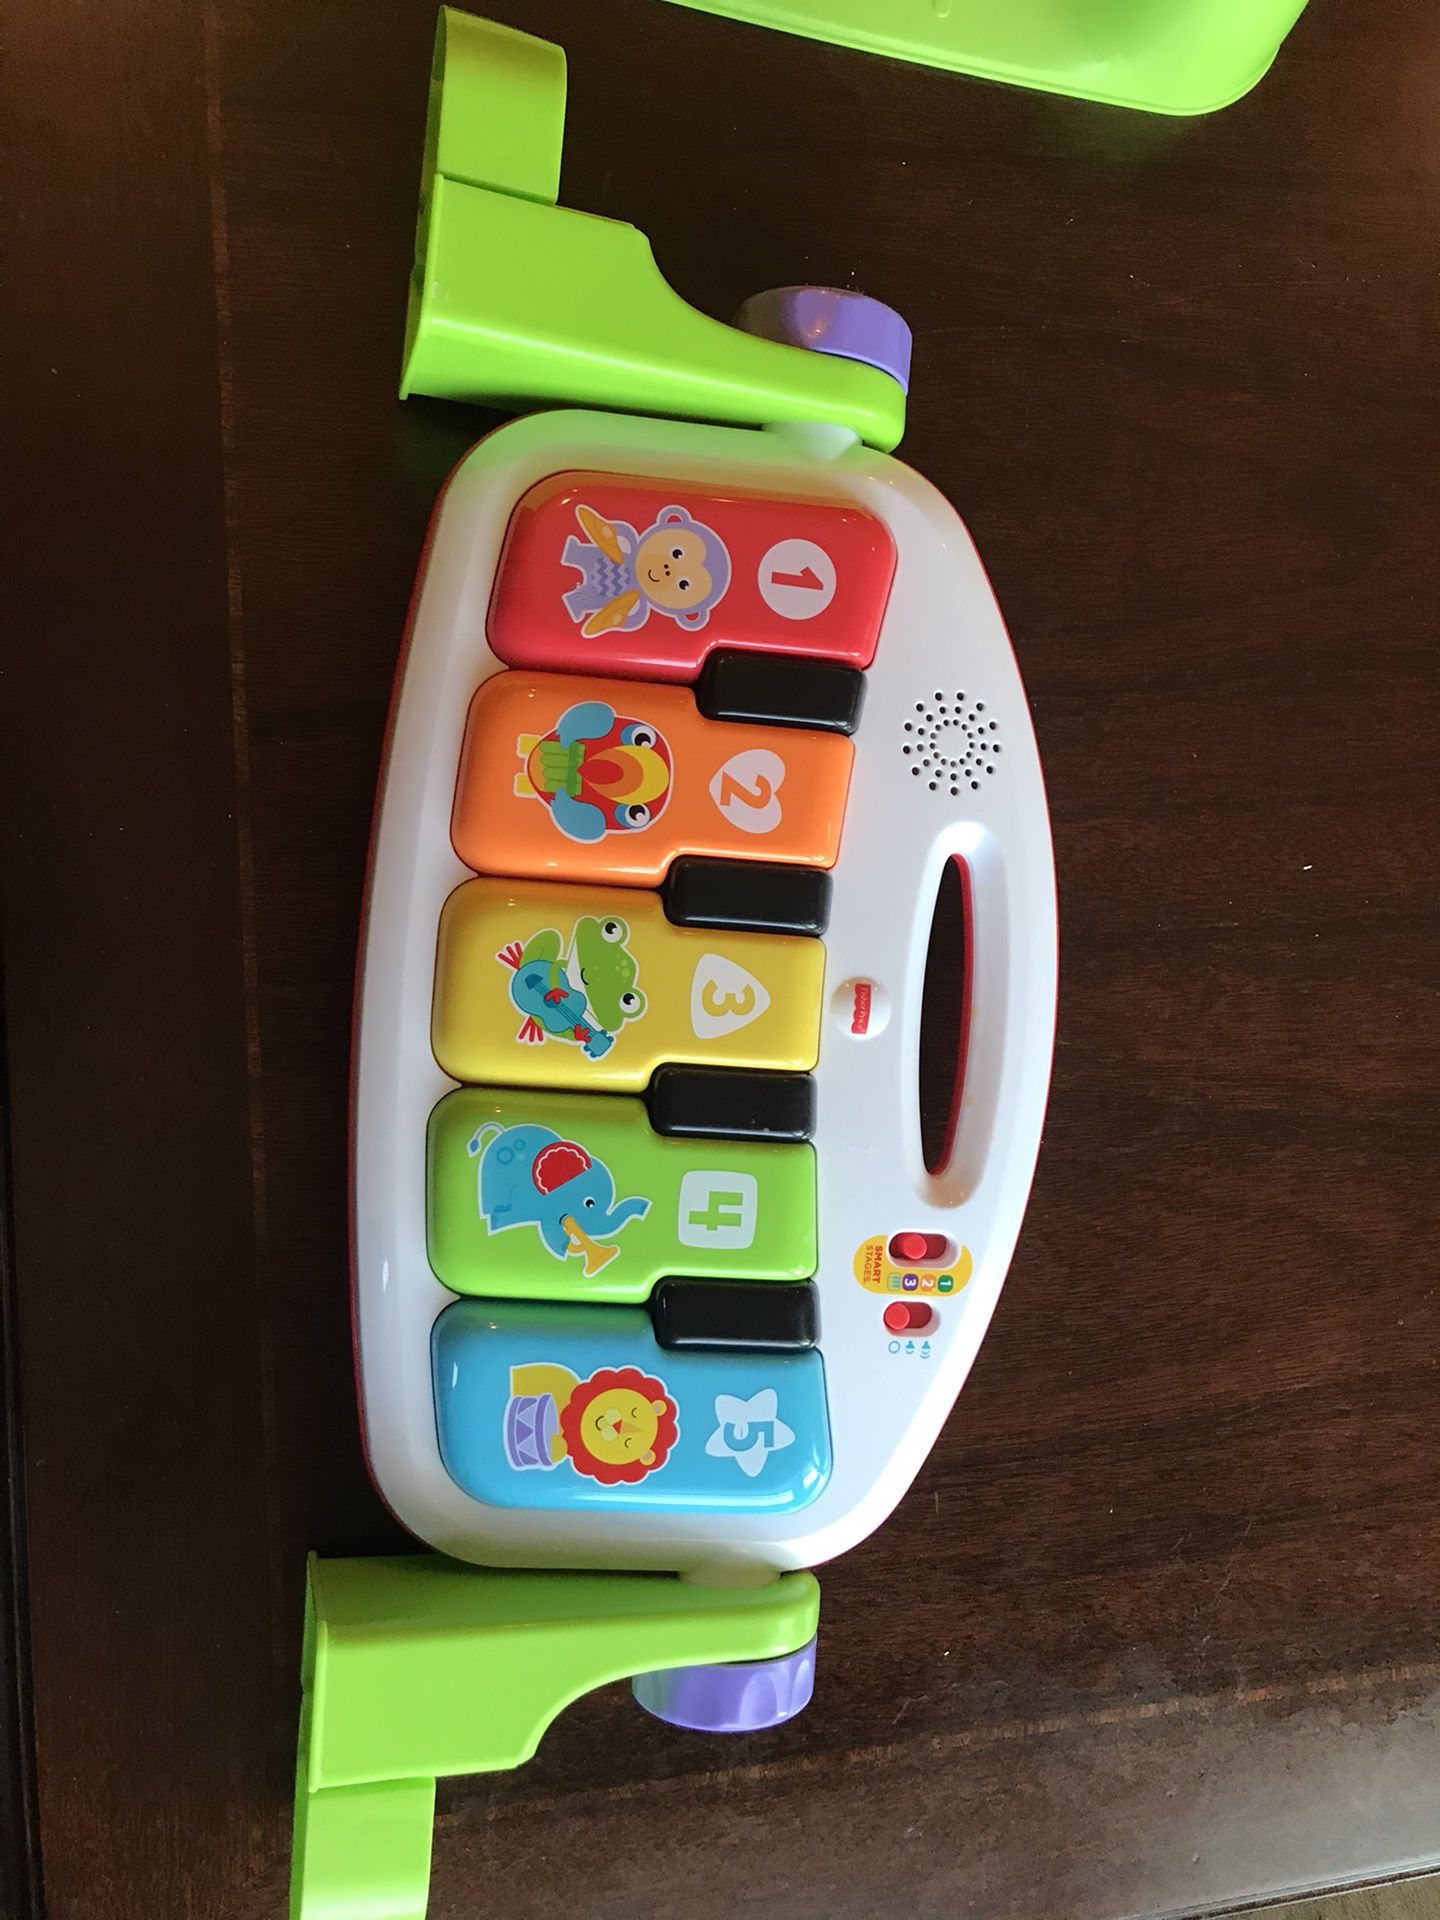 Fisher price kick and play smart stages piano. Works great